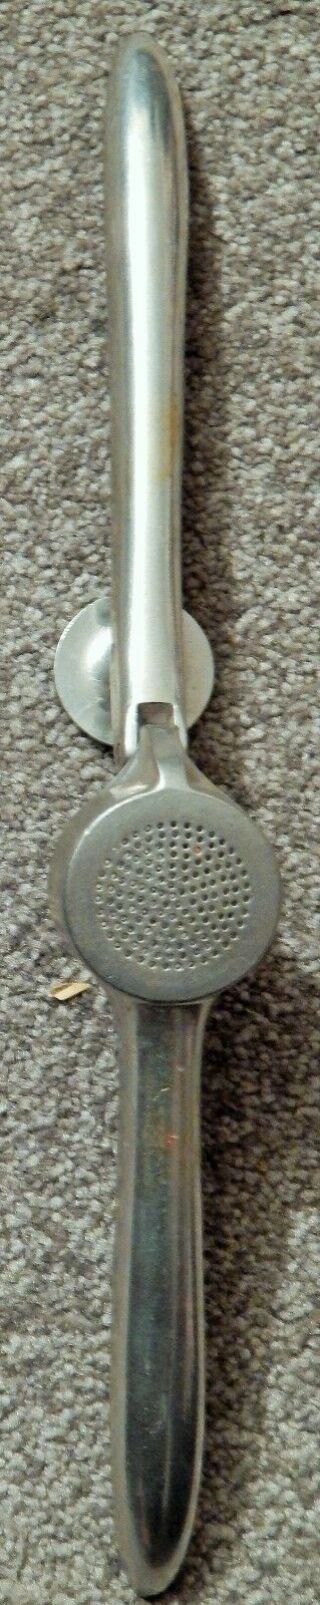 RARE 50,  YEARS OLD ZYLYSS GARLIC PRESS SWISS MADE MUCH SOUGHT COLLECTIBLE 3